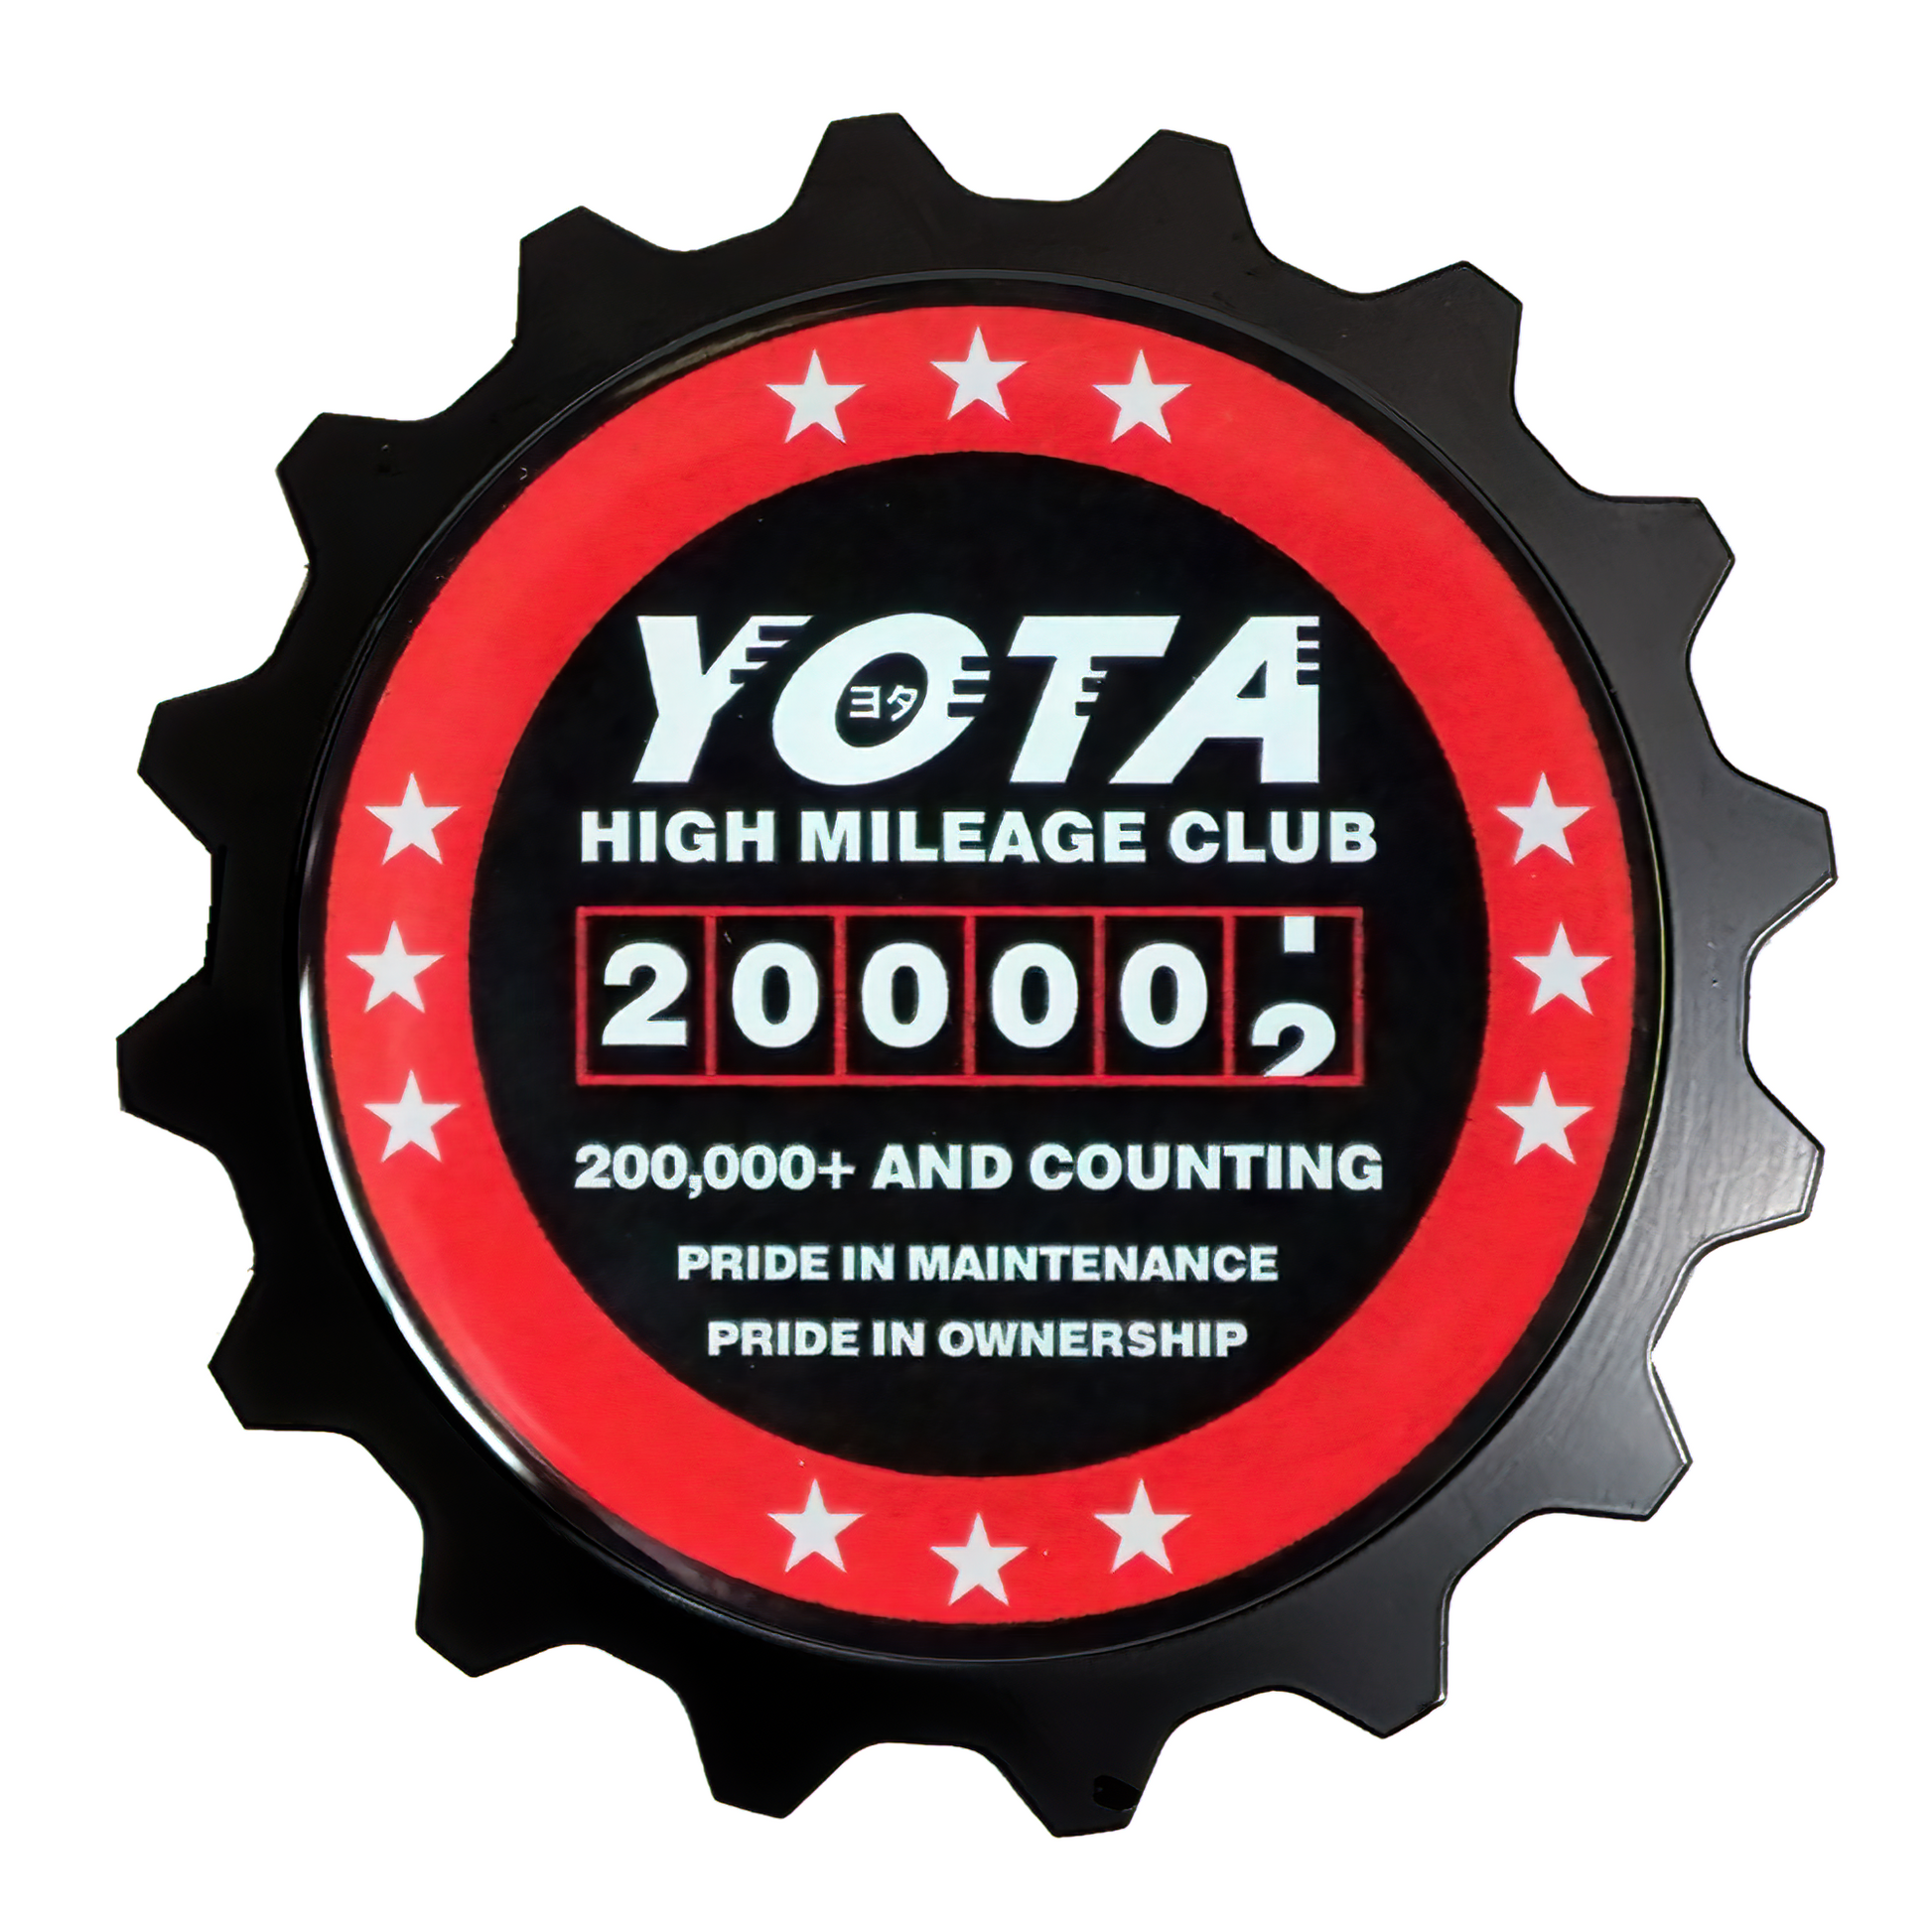 www.toyotahighmileageclub.com Yota High Miles Club Badge For Toyota Owners, High Mileage 200K is something to celebrate! If you hit the 200,000 mile mark in your reliable Toyota this is the badge of honor for you. We also have this design in a patch and decal sticker. High Miles Decal Toyota.